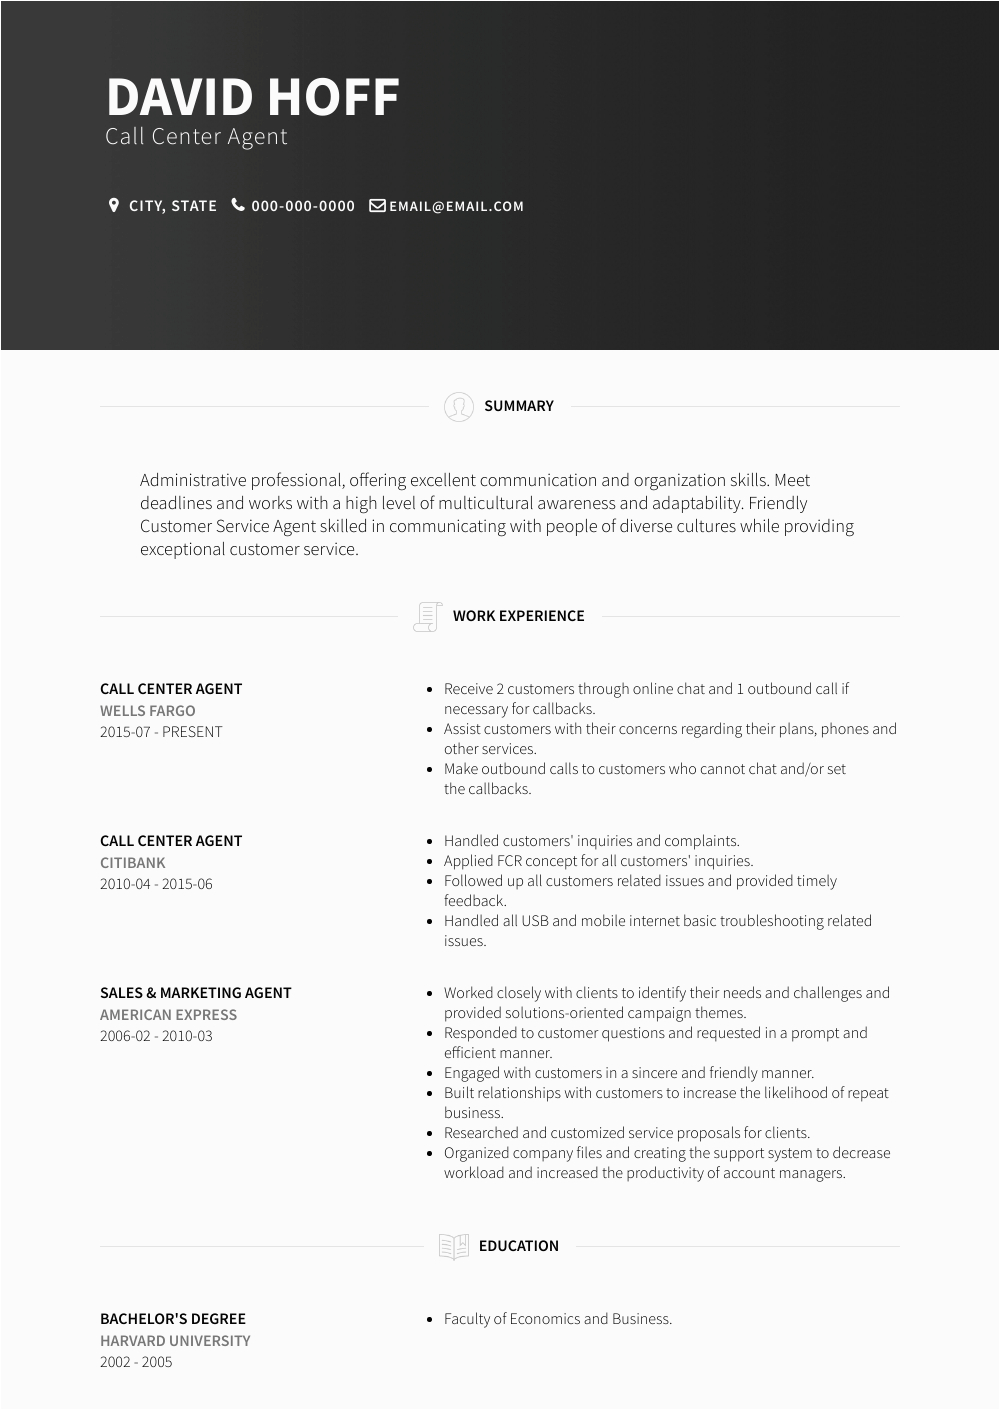 Sample Resume for Call Center Agent Call Center Agent Resume Samples and Templates